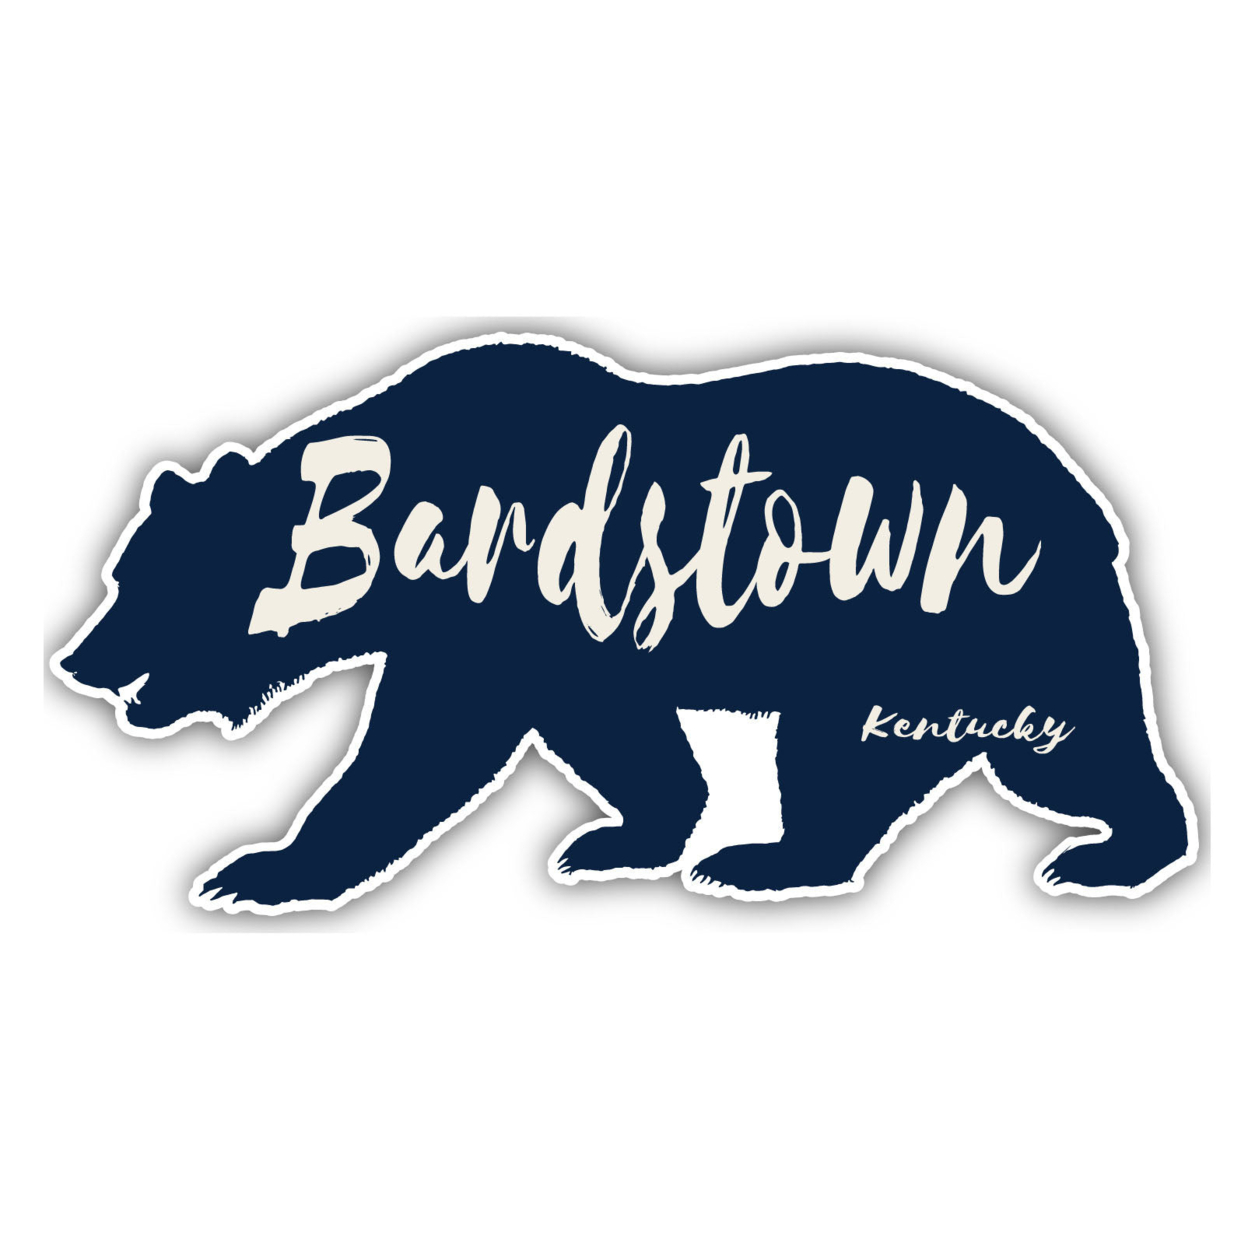 Bardstown Kentucky Souvenir Decorative Stickers (Choose Theme And Size) - Single Unit, 10-Inch, Great Outdoors